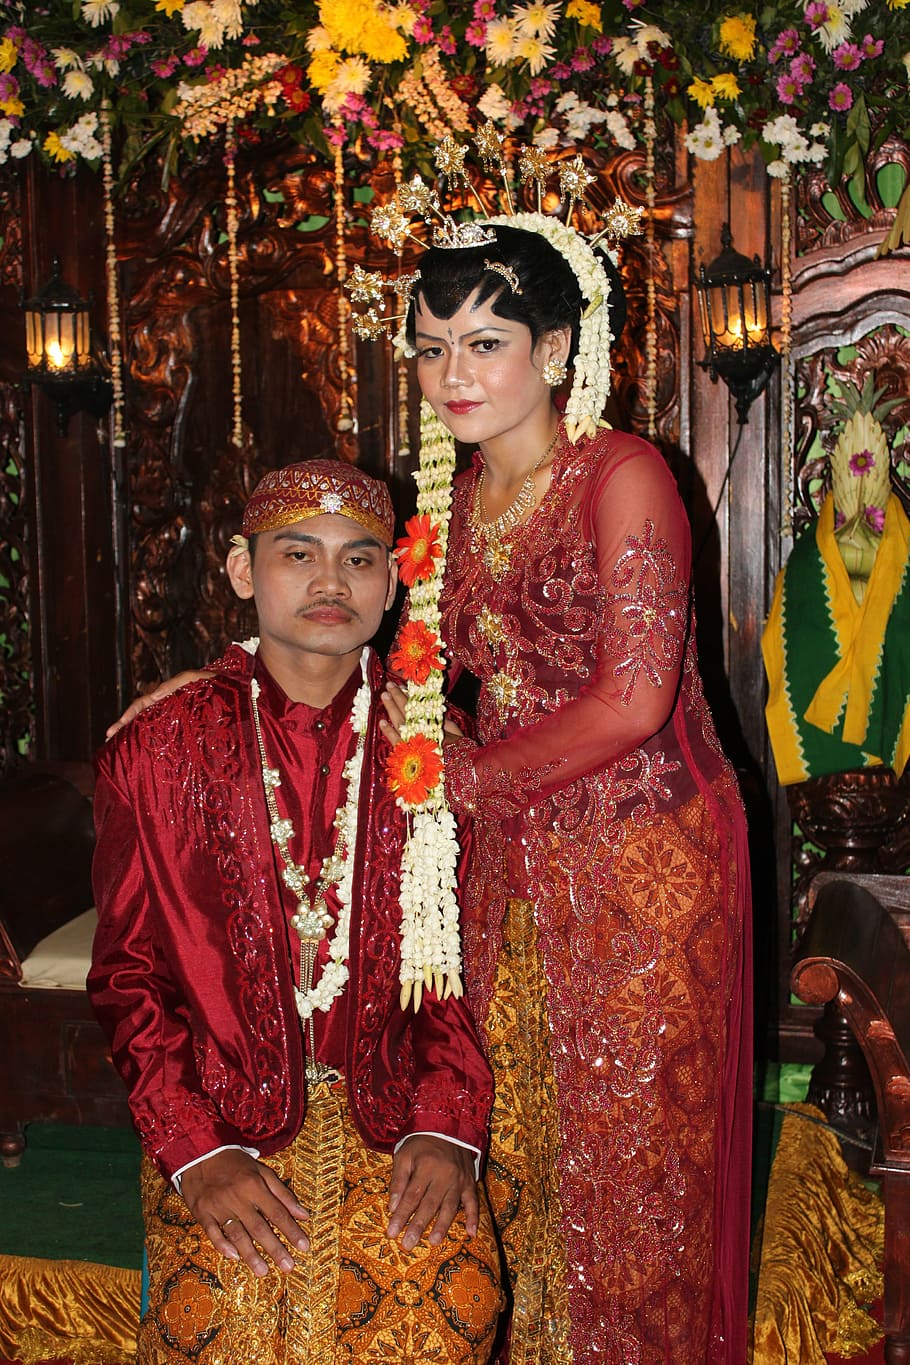 wedding, traditional javanese, tradition, batik, culture, traditional clothing, two people, young adult, adult, looking at camera